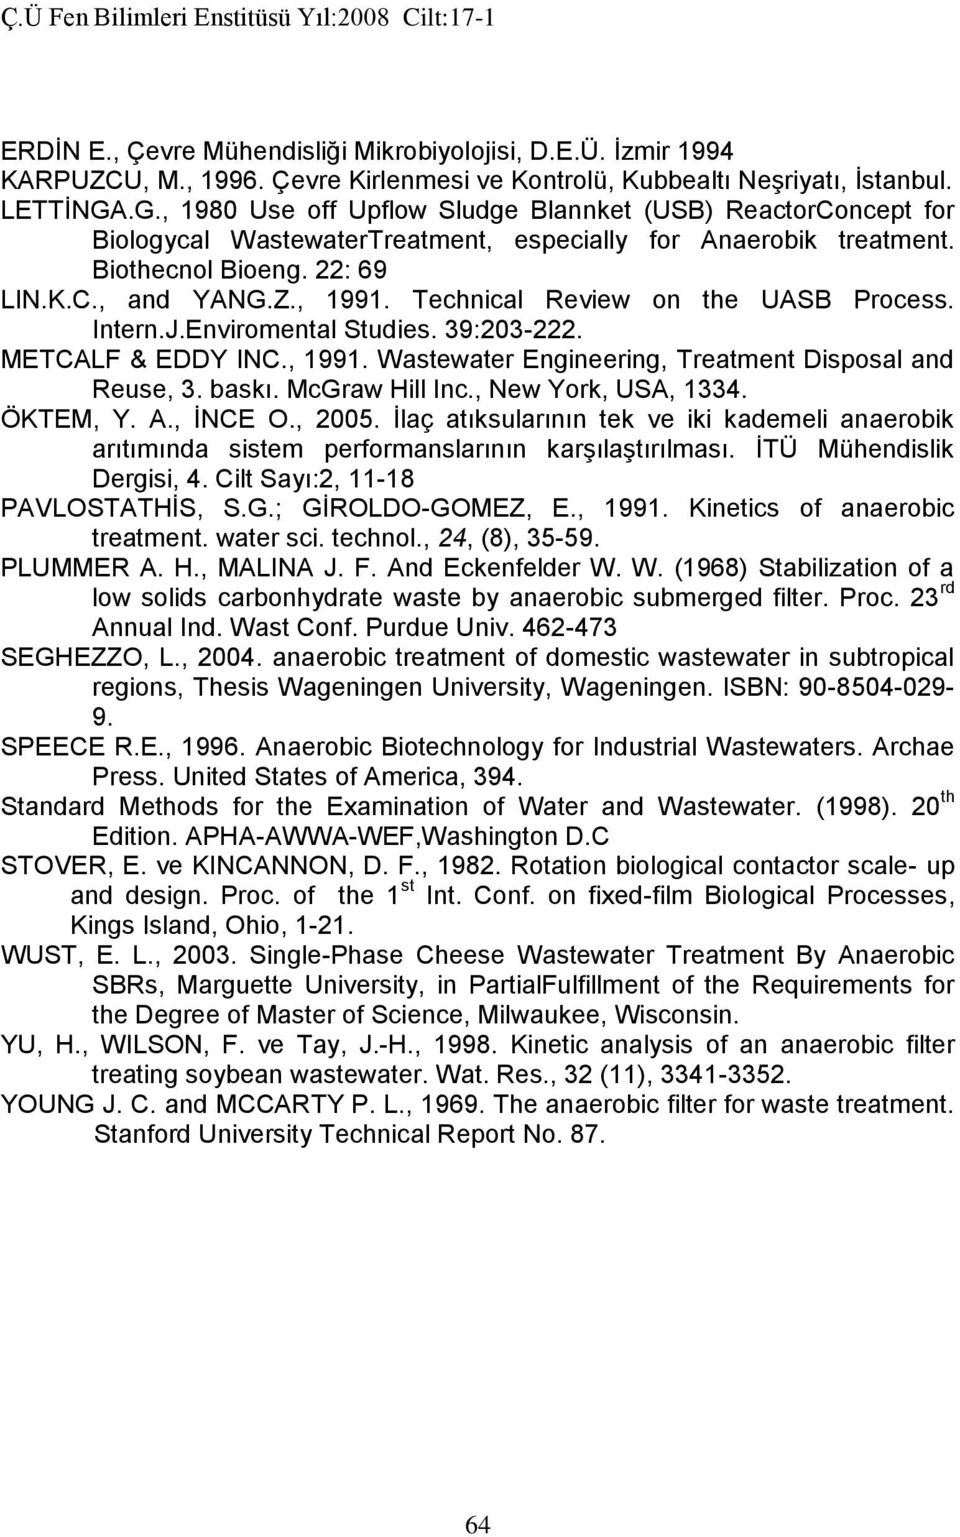 Technical Review on the UASB Process. Intern.J.Enviromental Studies. 39:203-222. METCALF & EDDY INC., 1991. Wastewater Engineering, Treatment Disposal and Reuse, 3. baskı. McGraw Hill Inc.